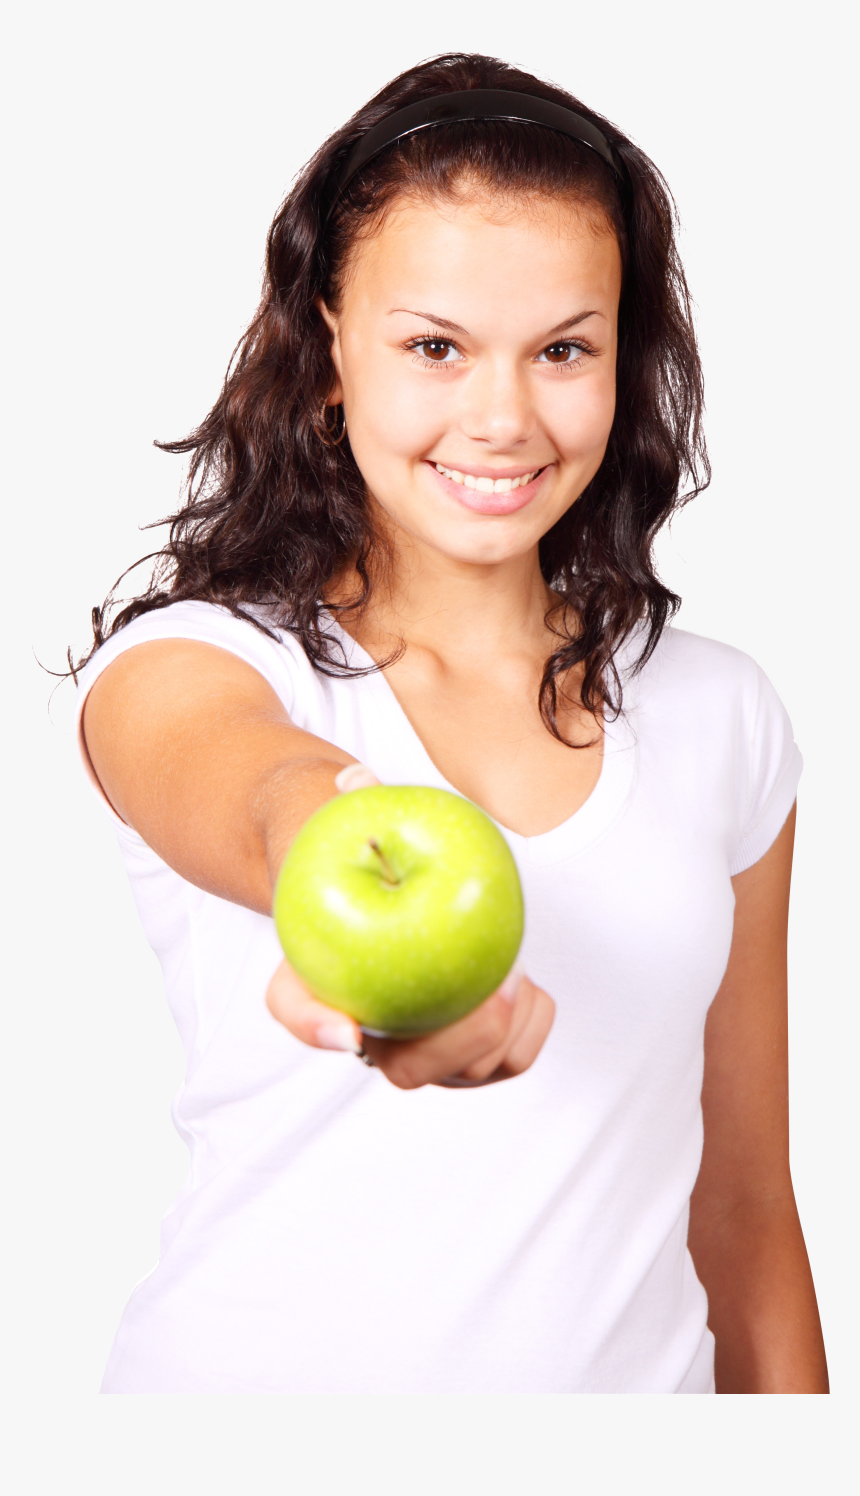 A Girl Hold Apple In Her Hand Png Image - Kashmiri Girl With Apple, Transparent Png, Free Download